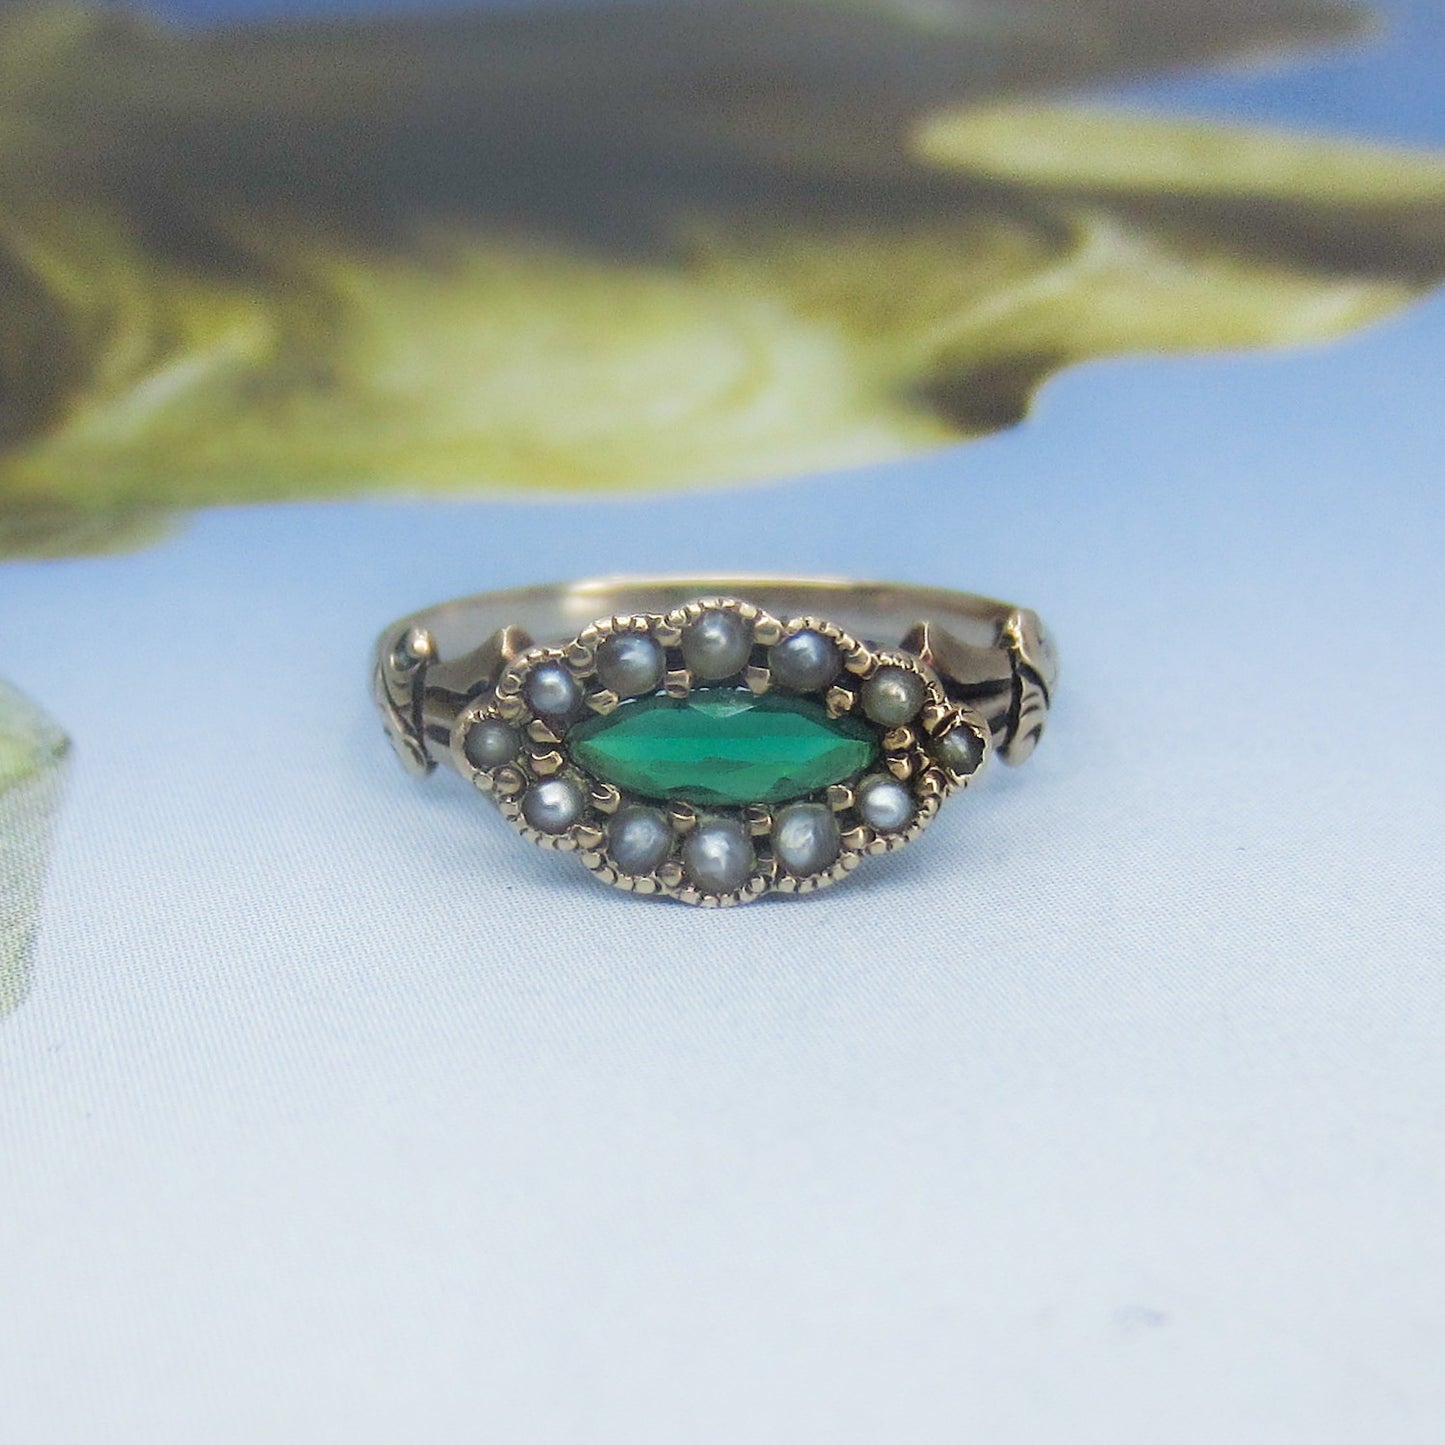 SOLD Victorian Green Glass and Seed Pearl Ring 14k c. 1880